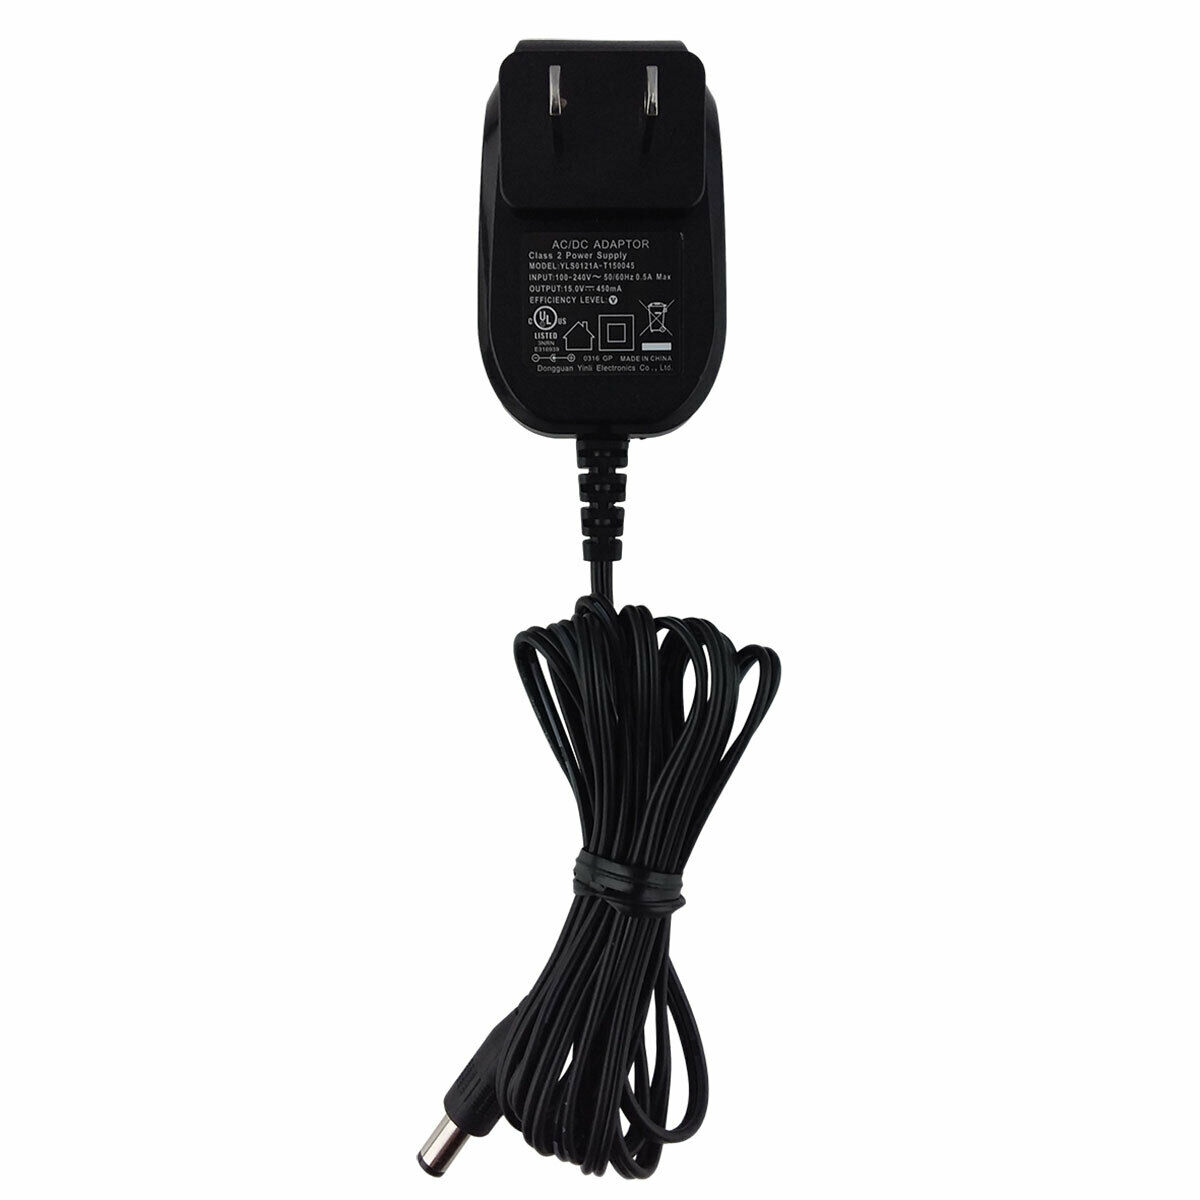 Vtech Toy Transformer Charger AC Adapter Power Supply S004LAU0750065 7.5V 4.9W Type: AC Adapter MPN: S004LAU0750065